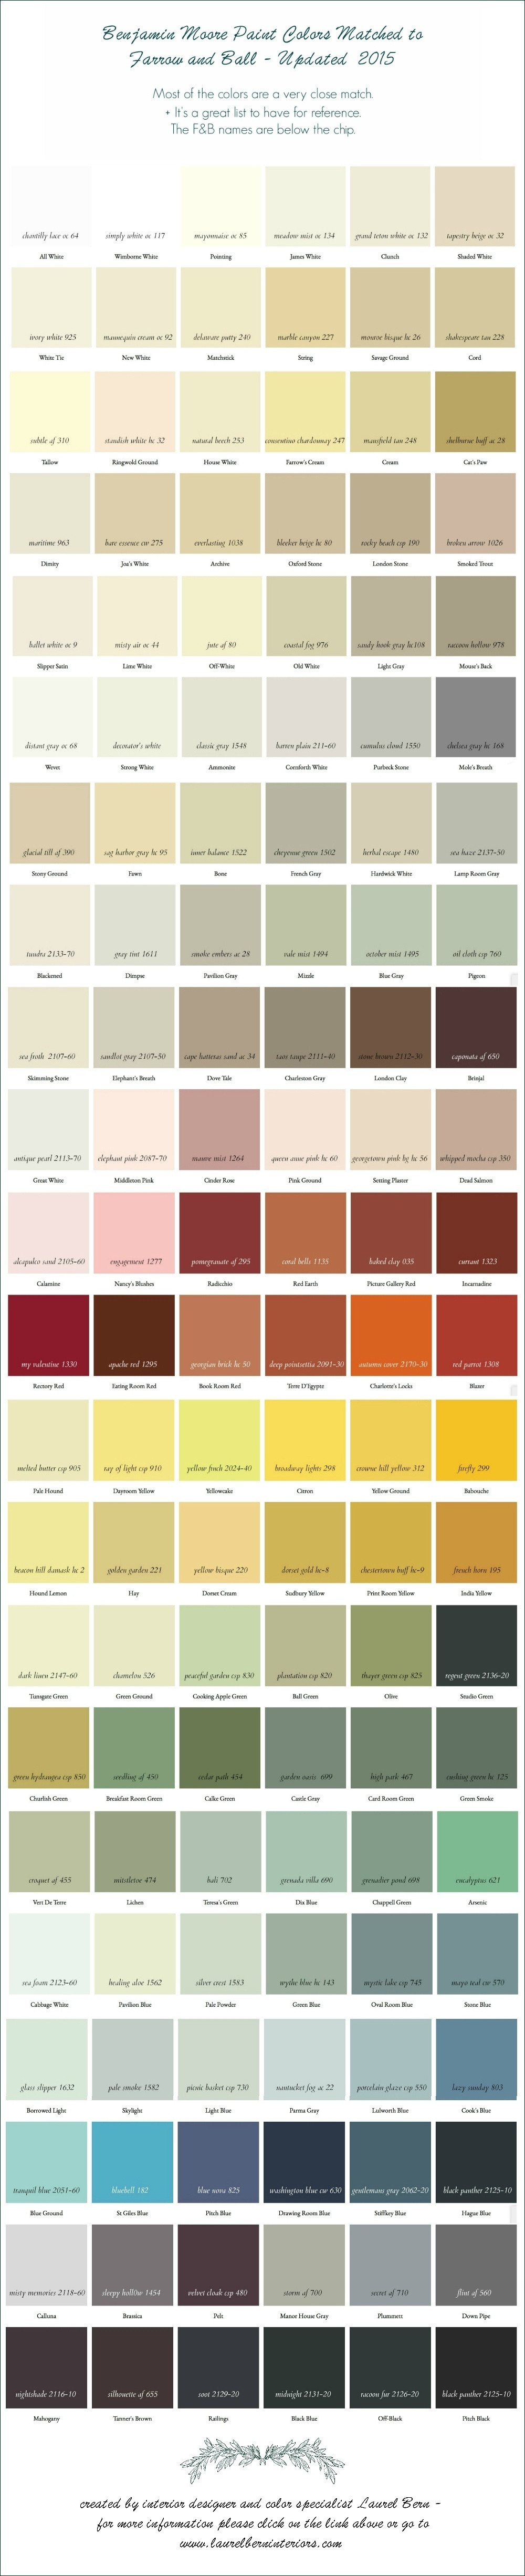 Best ideas about Benjamin Moore Paint Colors
. Save or Pin Benjamin Moore Paint Colors Matched To Farrow & Ball 2015 Now.